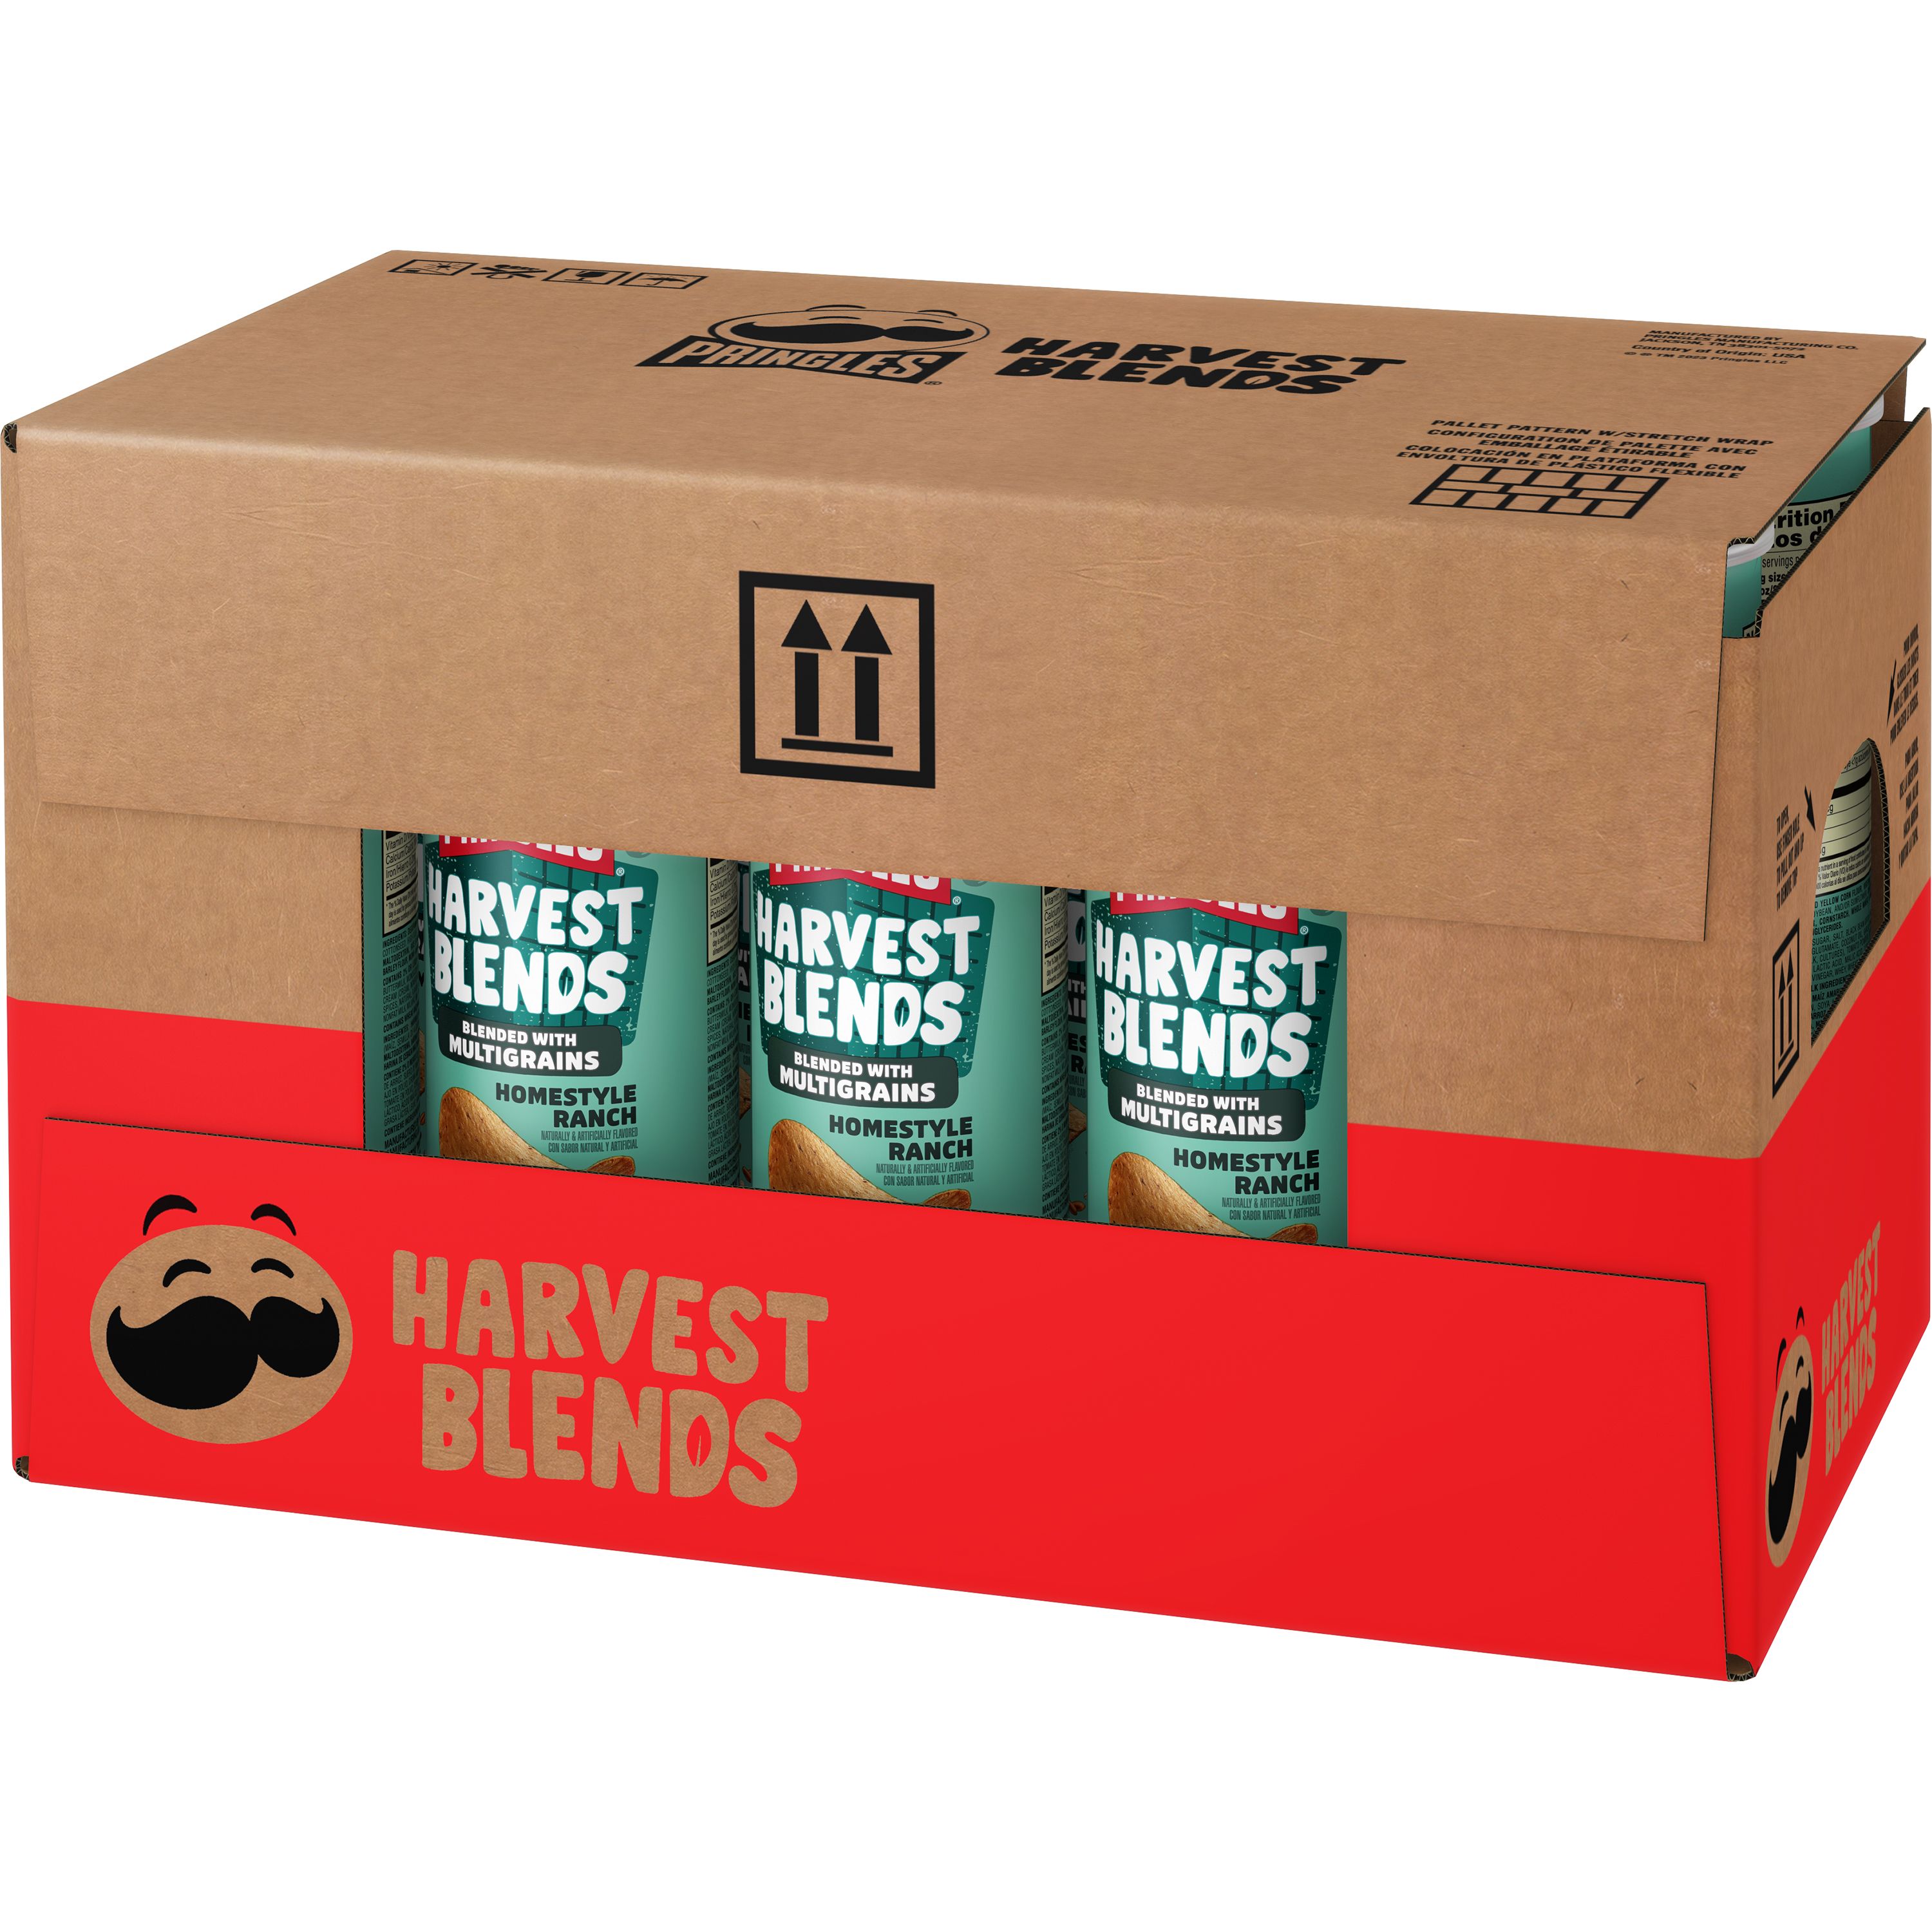 Pringles® Harvest Blends Homestyle Ranch product image thumbnail 7